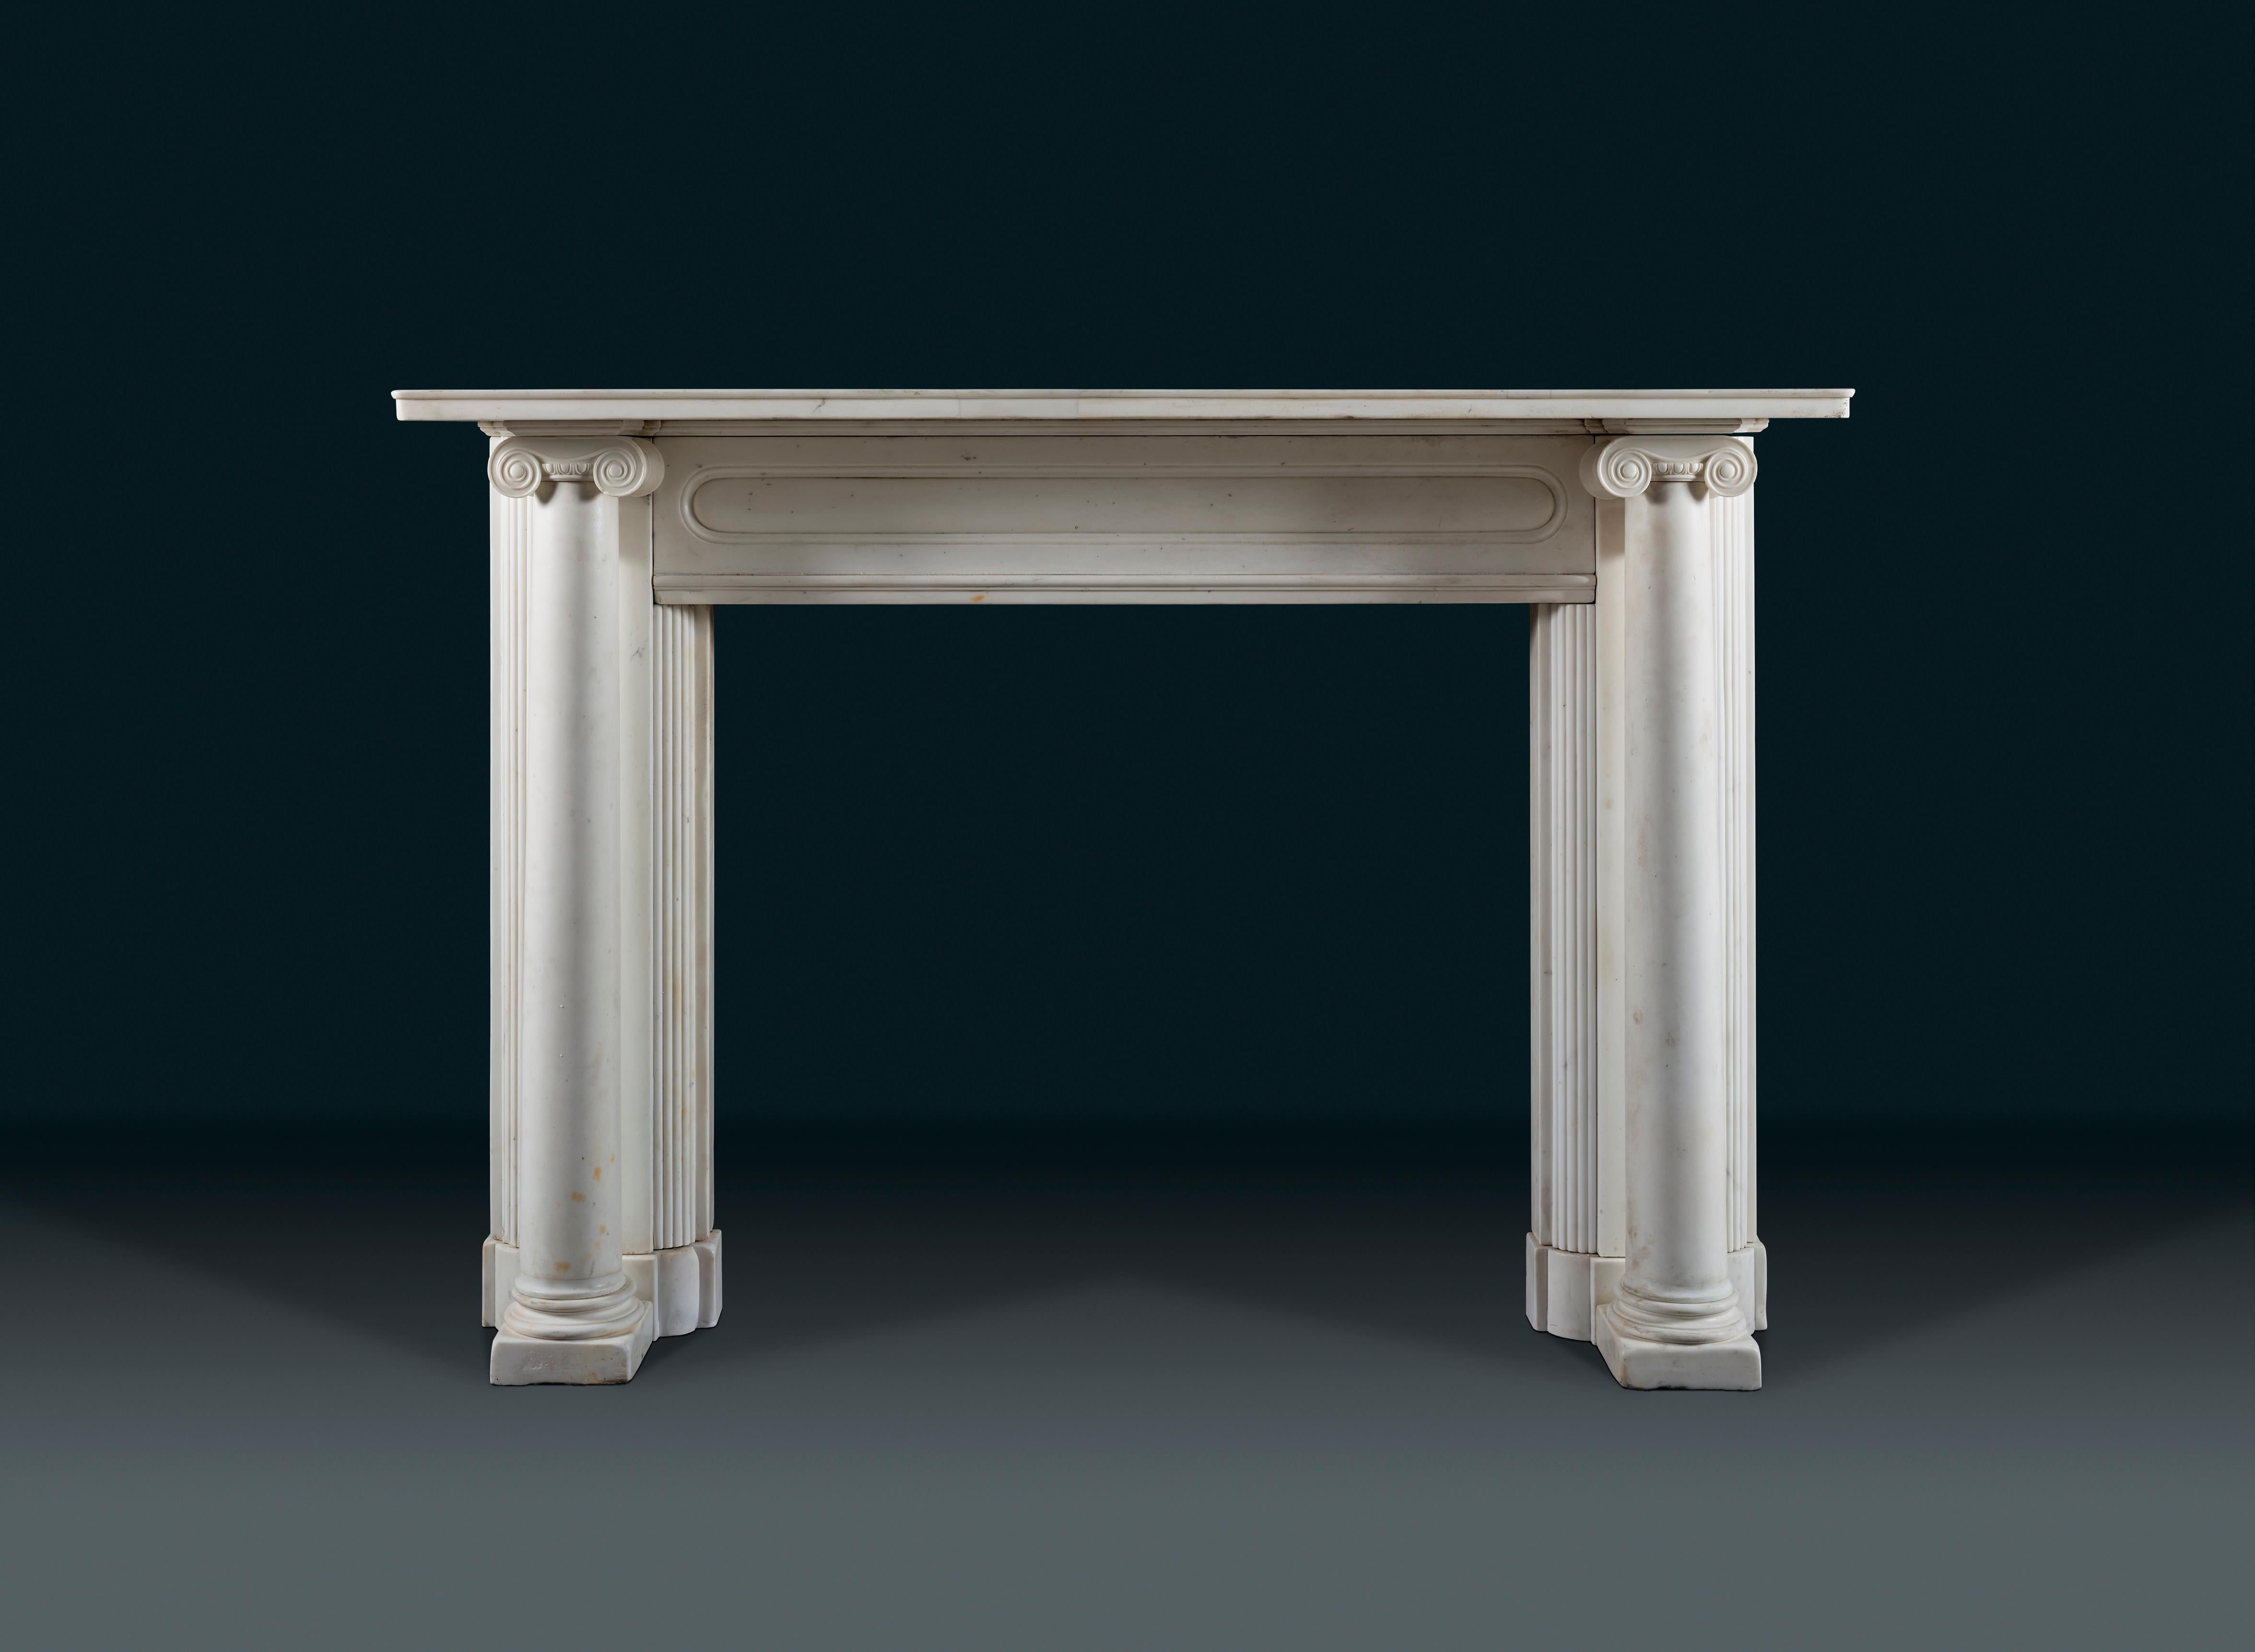 A characterful statuary marble fireplace after Sir John Soane. The shelf resting directly on the Ionic capitals of the columns make this a very architectural piece. The use of detached columns as jambs was firstly seen in the Early Renaissance, and